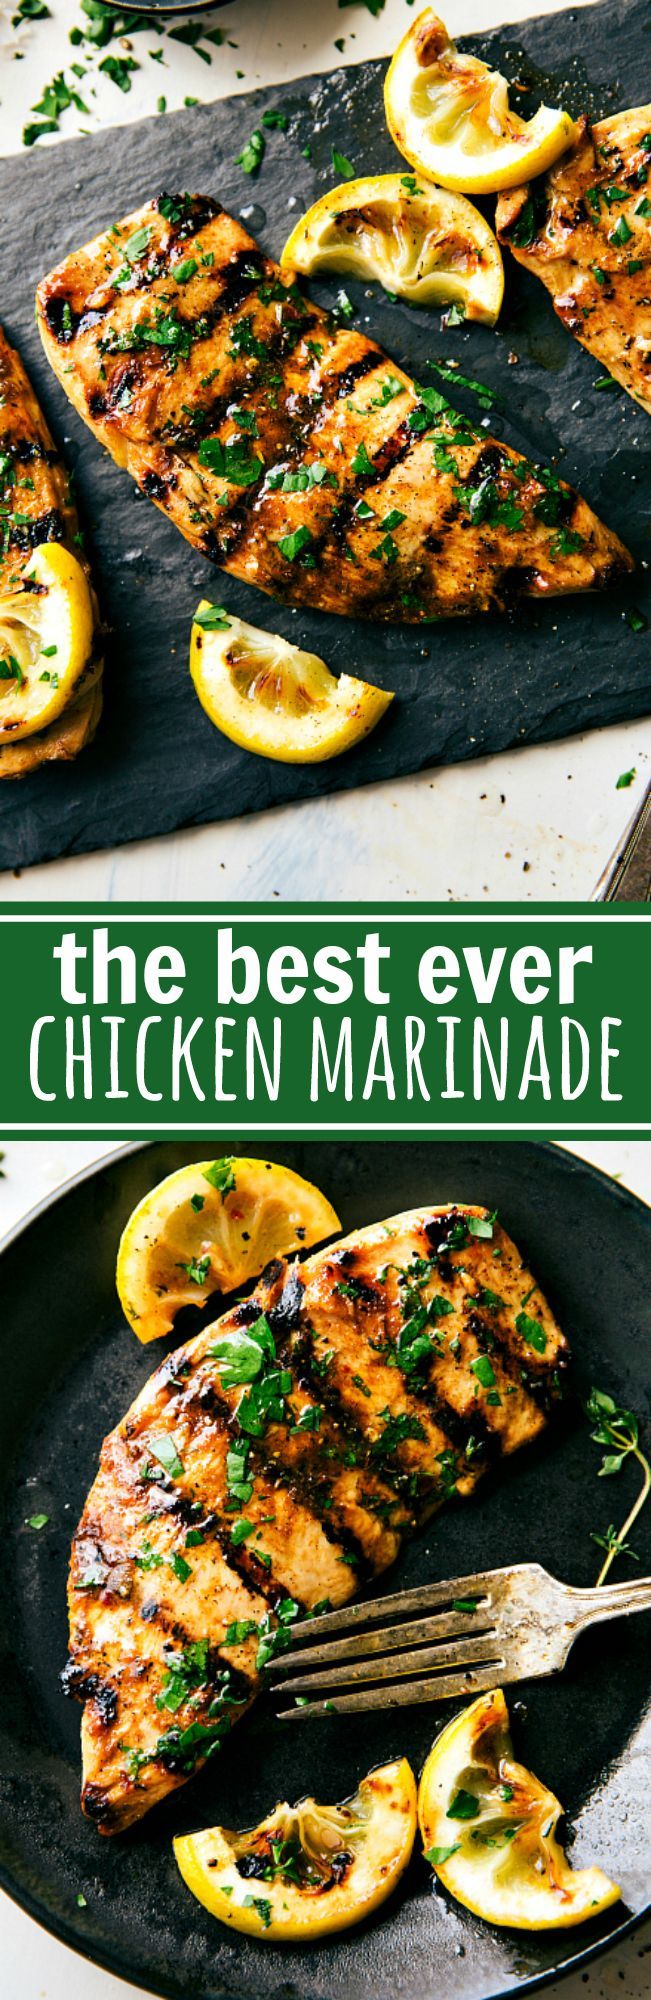 The absolute best chicken marinade recipe! Easy and delicious via chelseasmessyapron.com